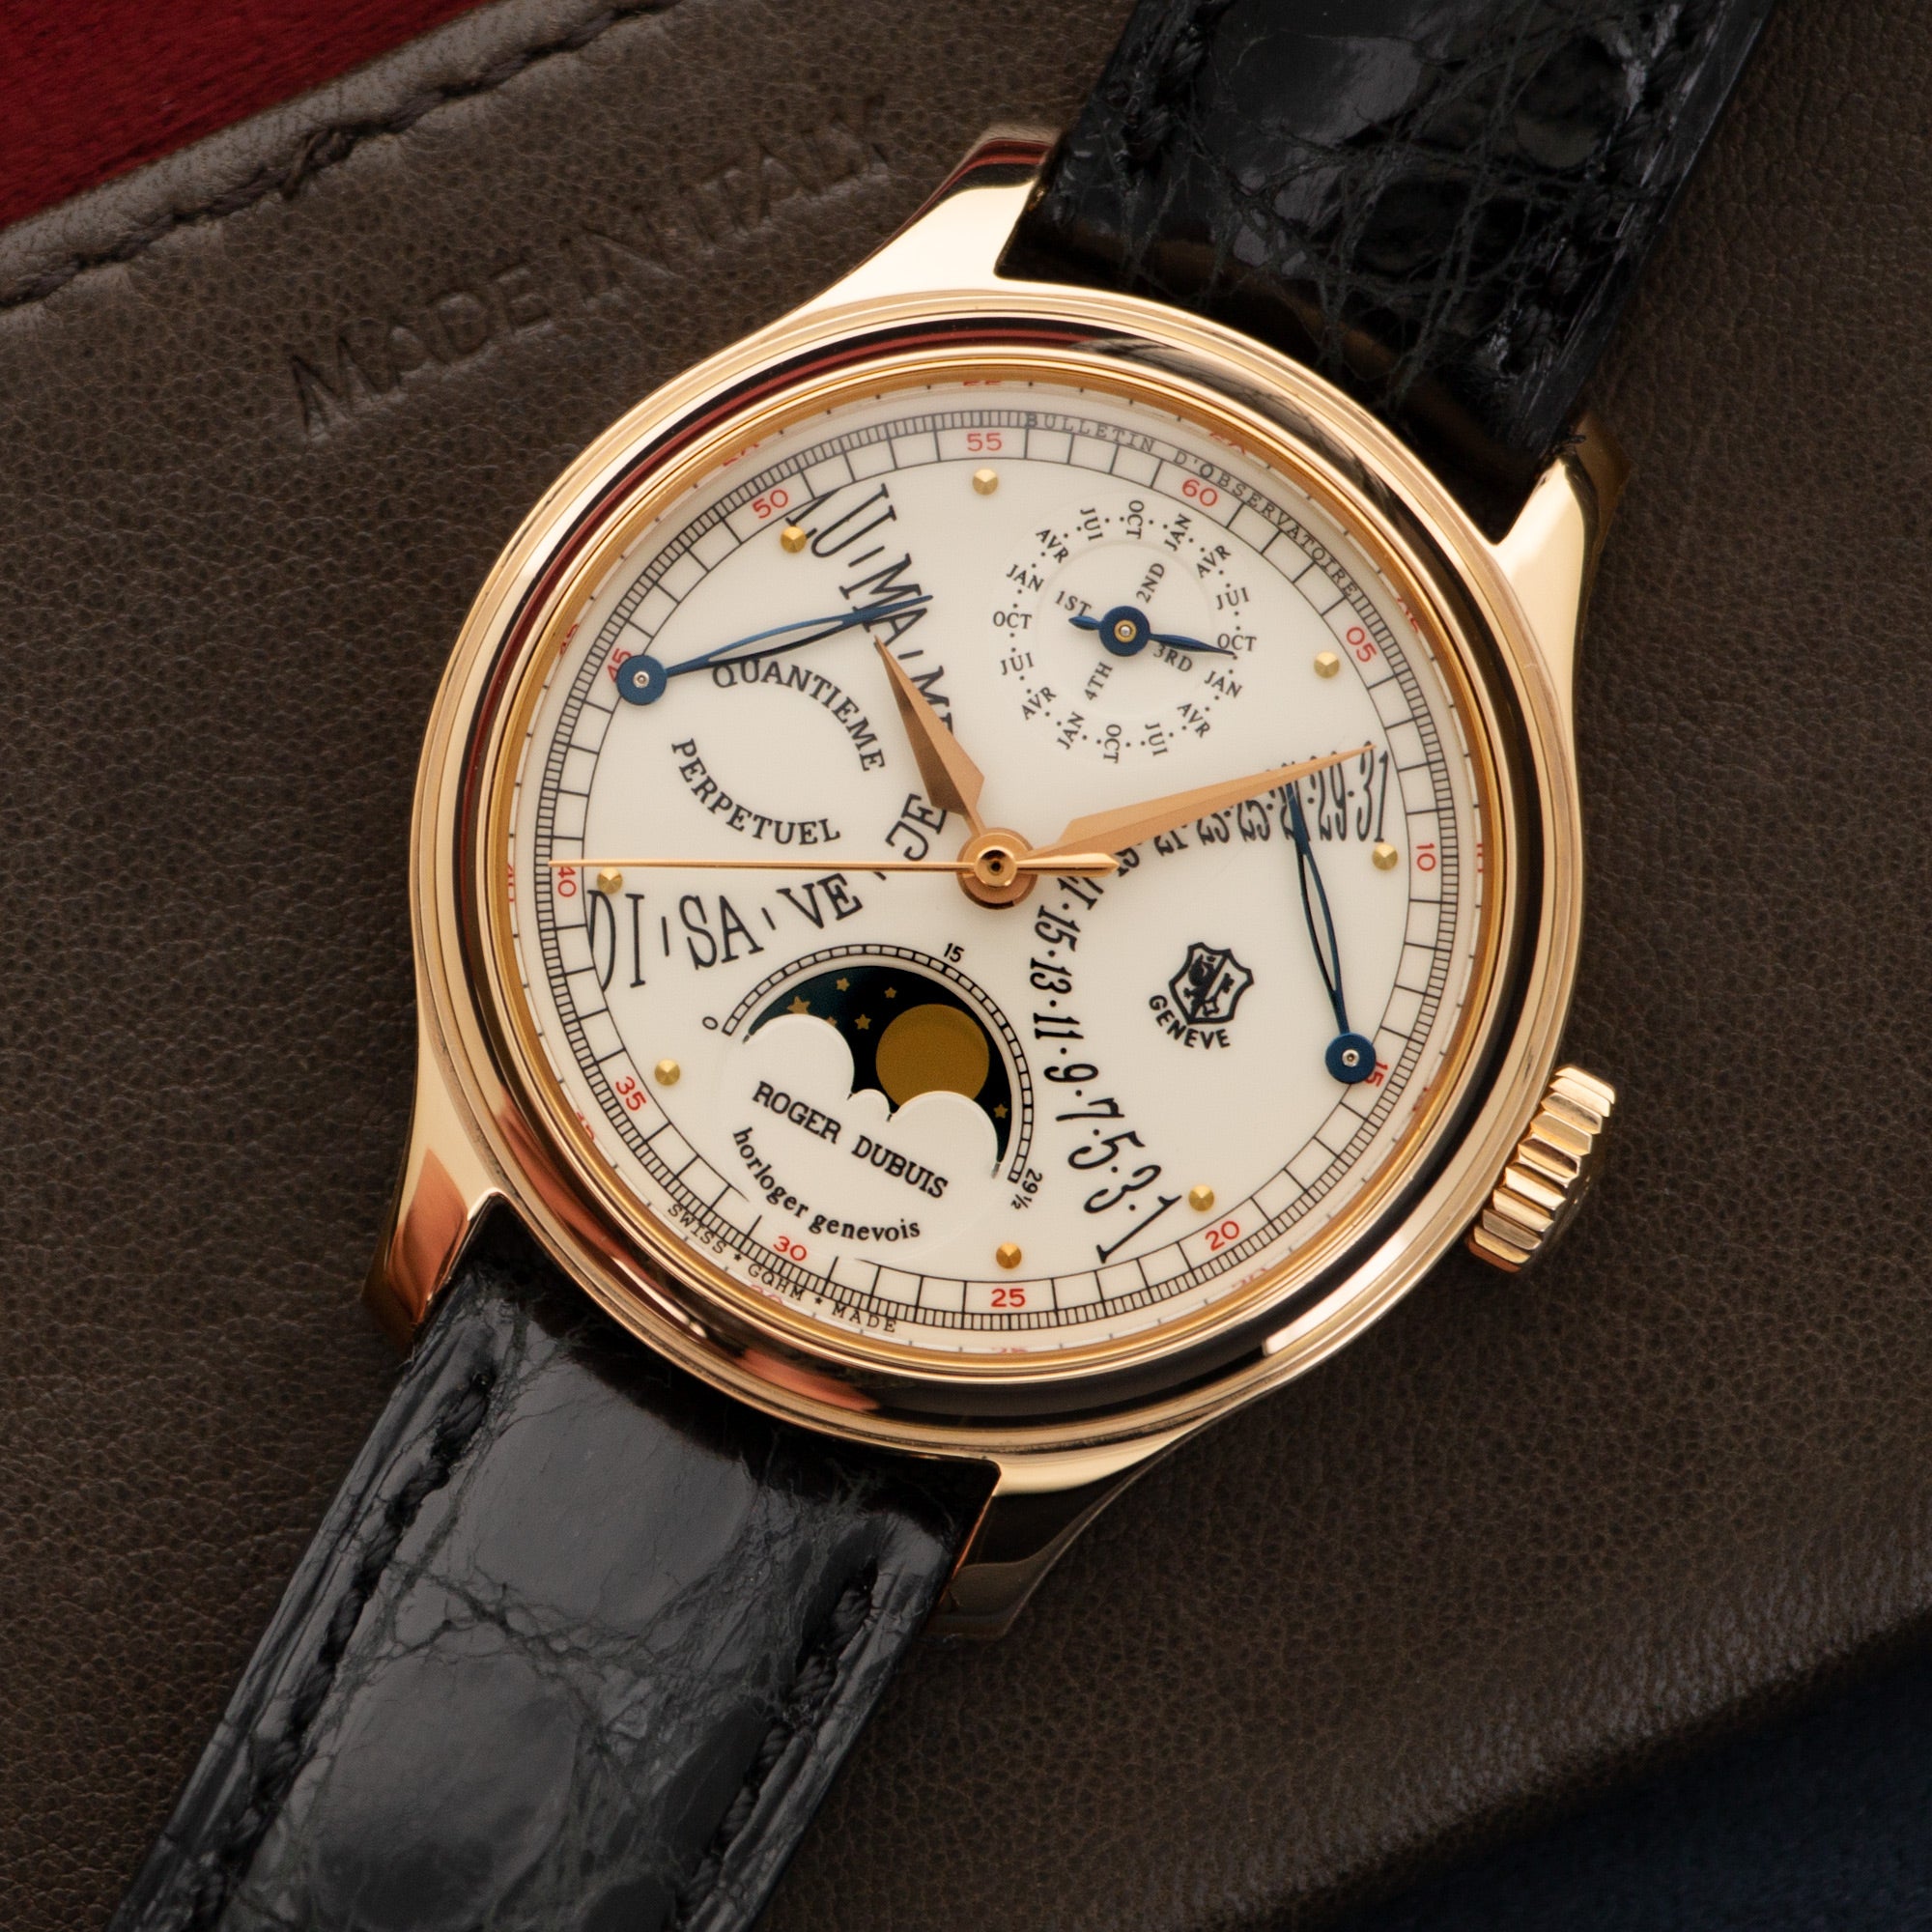 Roger Dubuis - Roger Dubuis Rose Gold Hommage Perpetual Retrograde Watch - The Keystone Watches